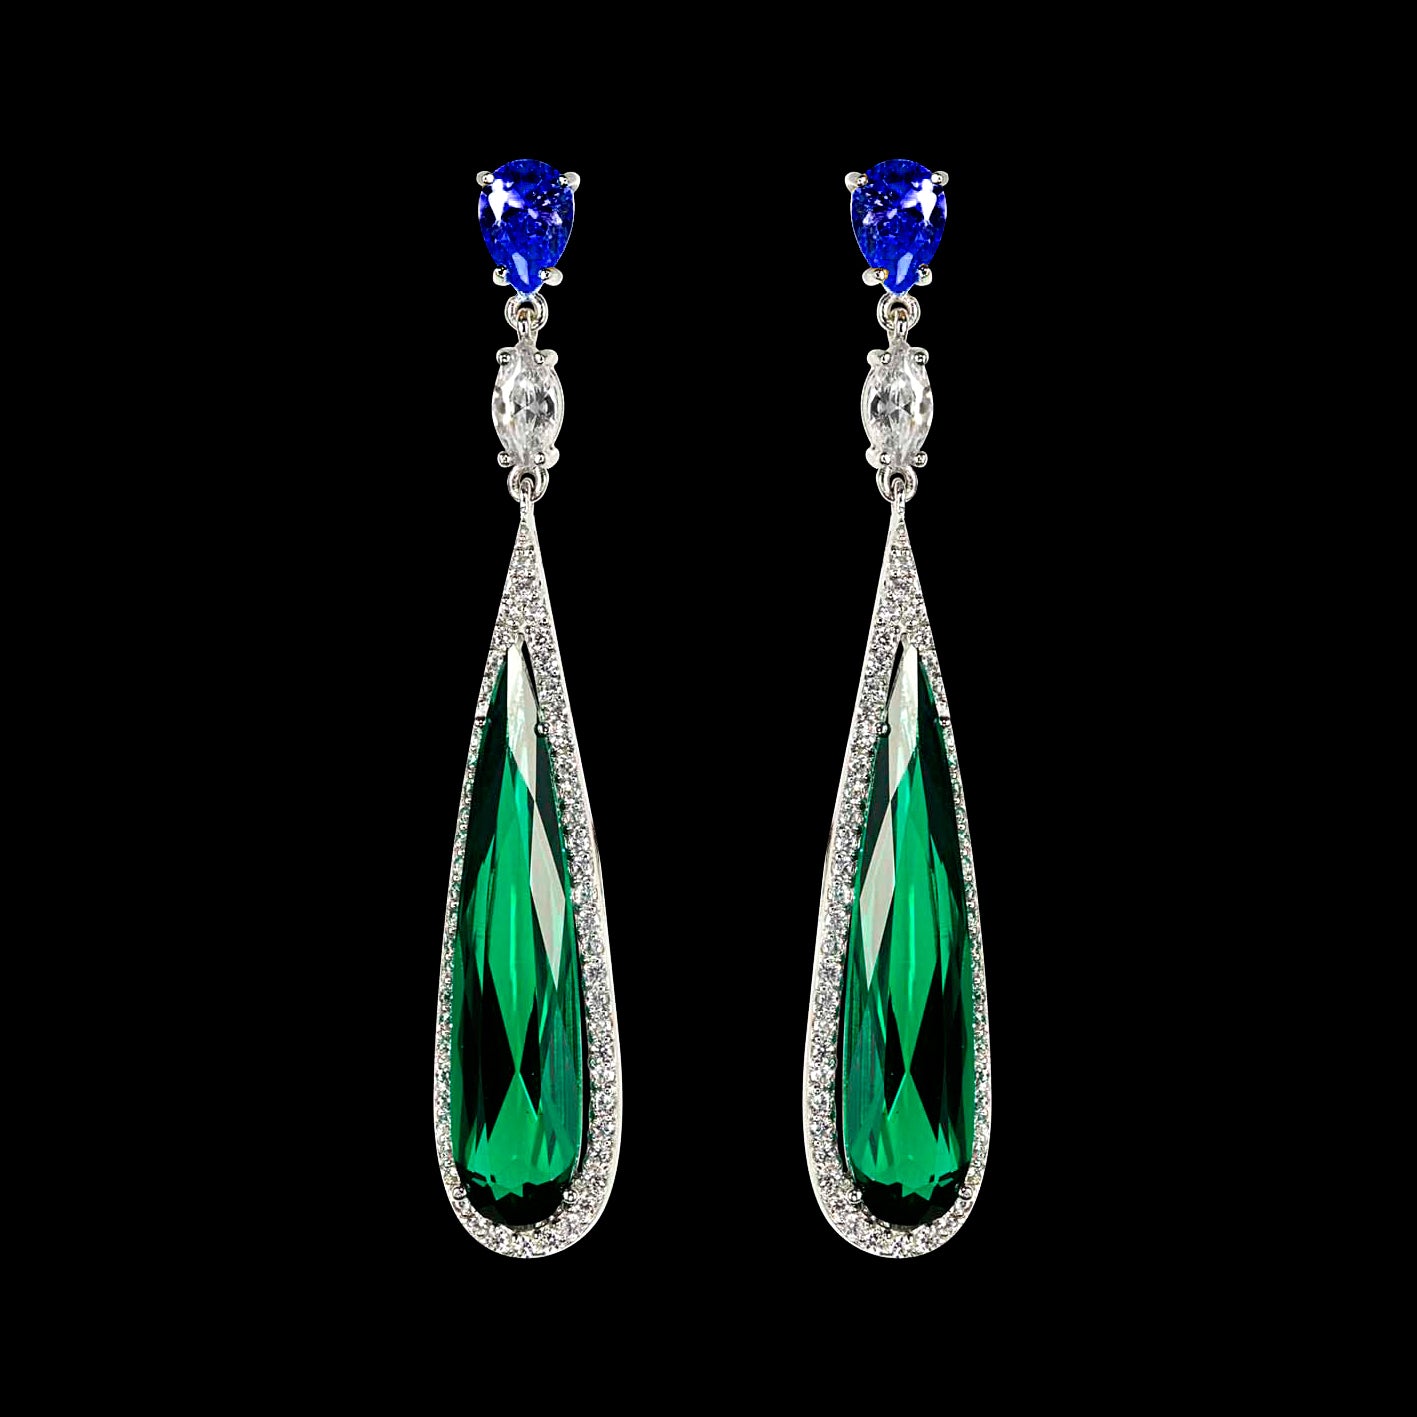 Shard Emerald Earrings, Earring, Anabela Chan Joaillerie - Fine jewelry with laboratory grown and created gemstones hand-crafted in the United Kingdom. Anabela Chan Joaillerie is the first fine jewellery brand in the world to champion laboratory-grown and created gemstones with high jewellery design, artisanal craftsmanship and a focus on ethical and sustainable innovations.